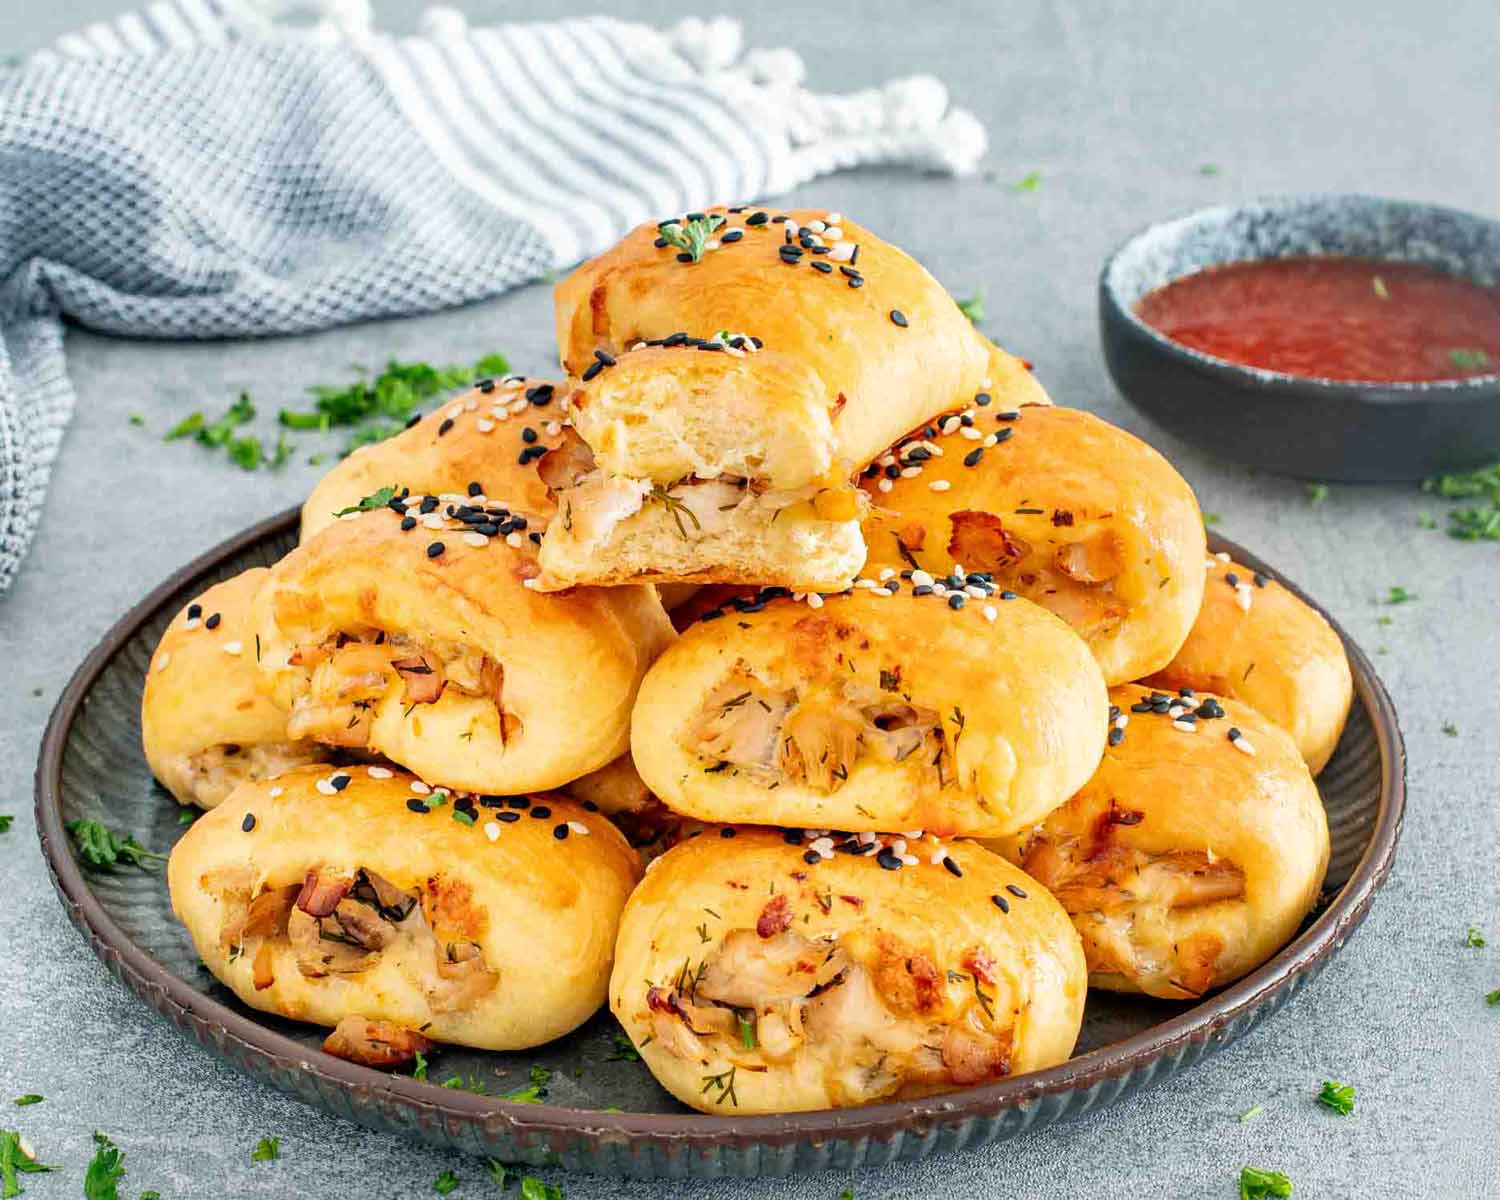 a plateful of delicious turkey bites made with a fluffy, homemade dough.